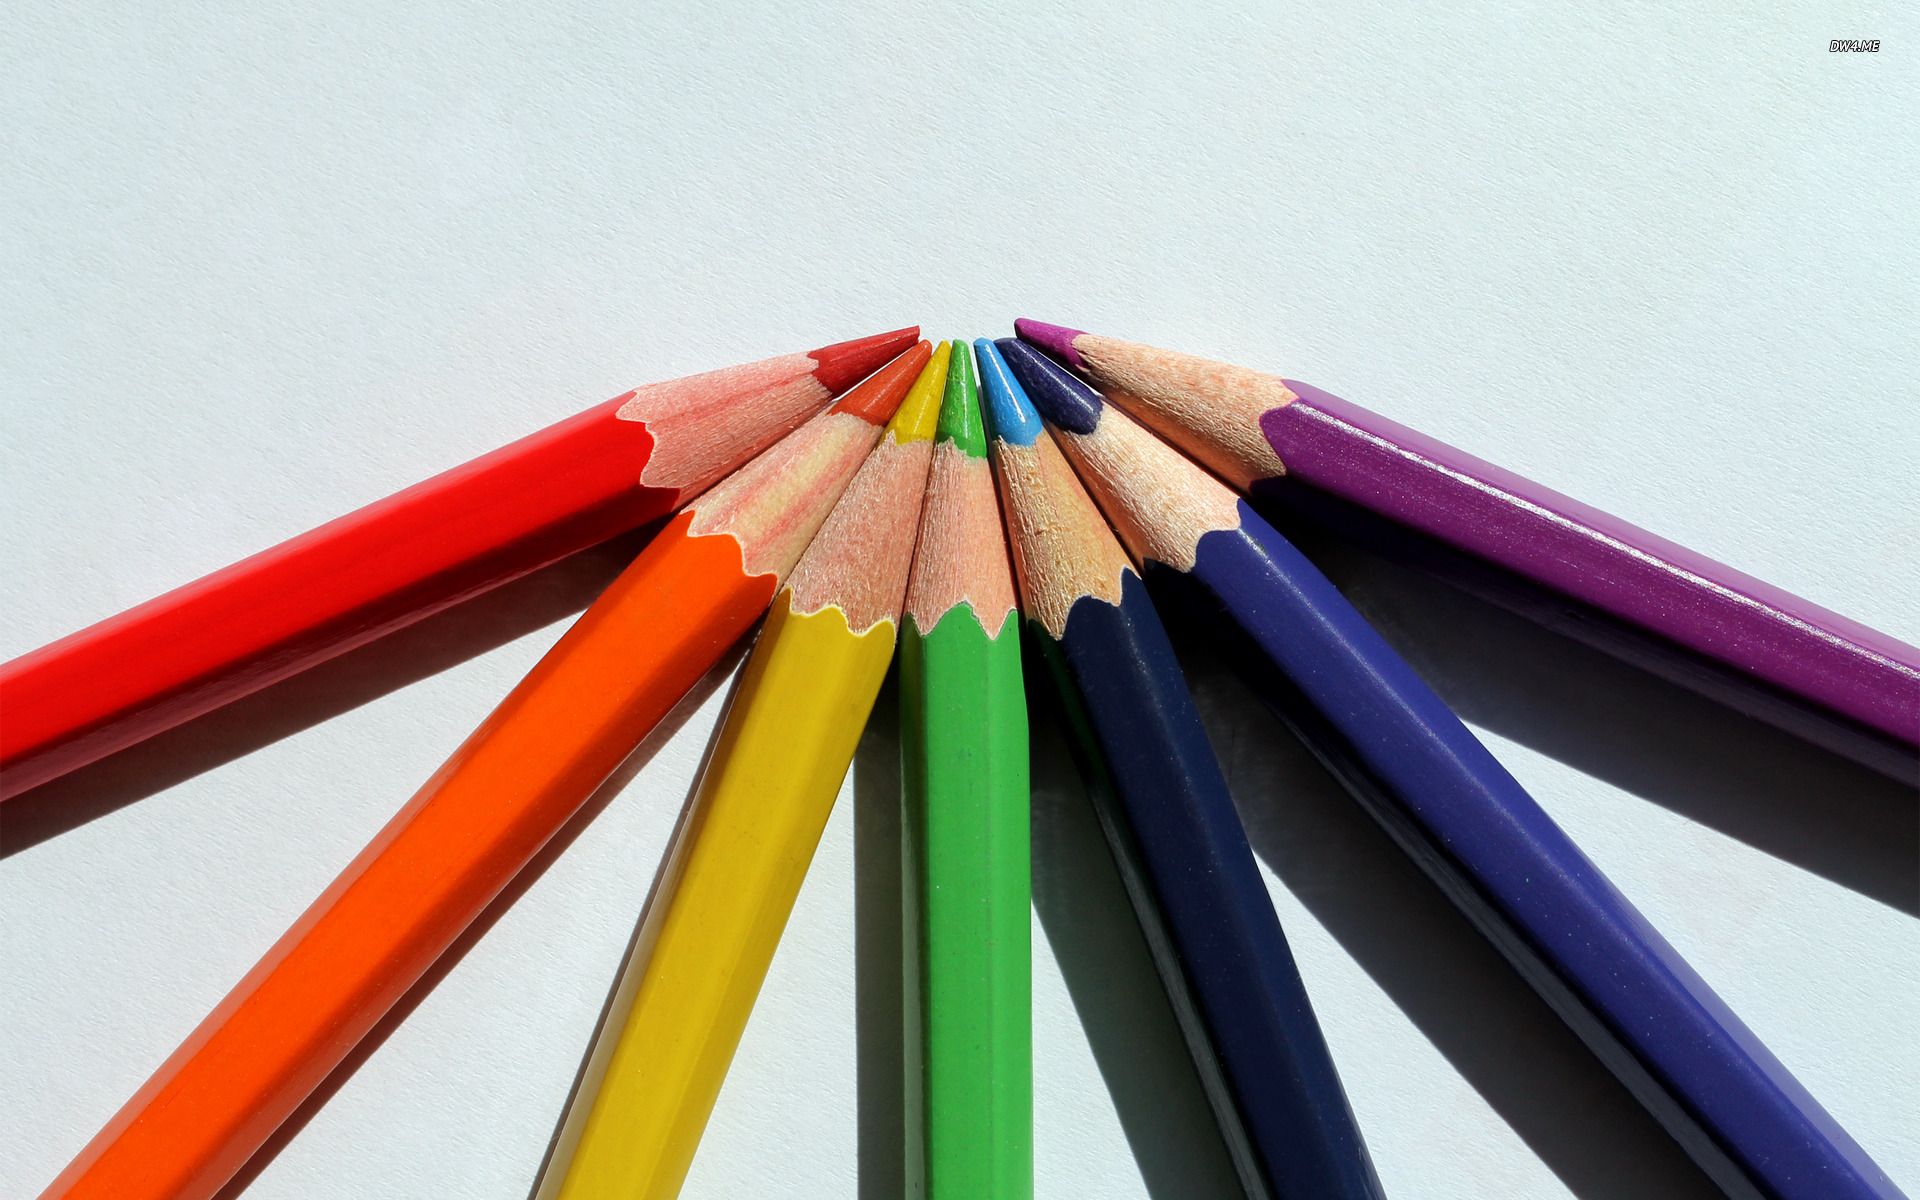 Colored pencils wallpaper - Photography wallpapers - #38